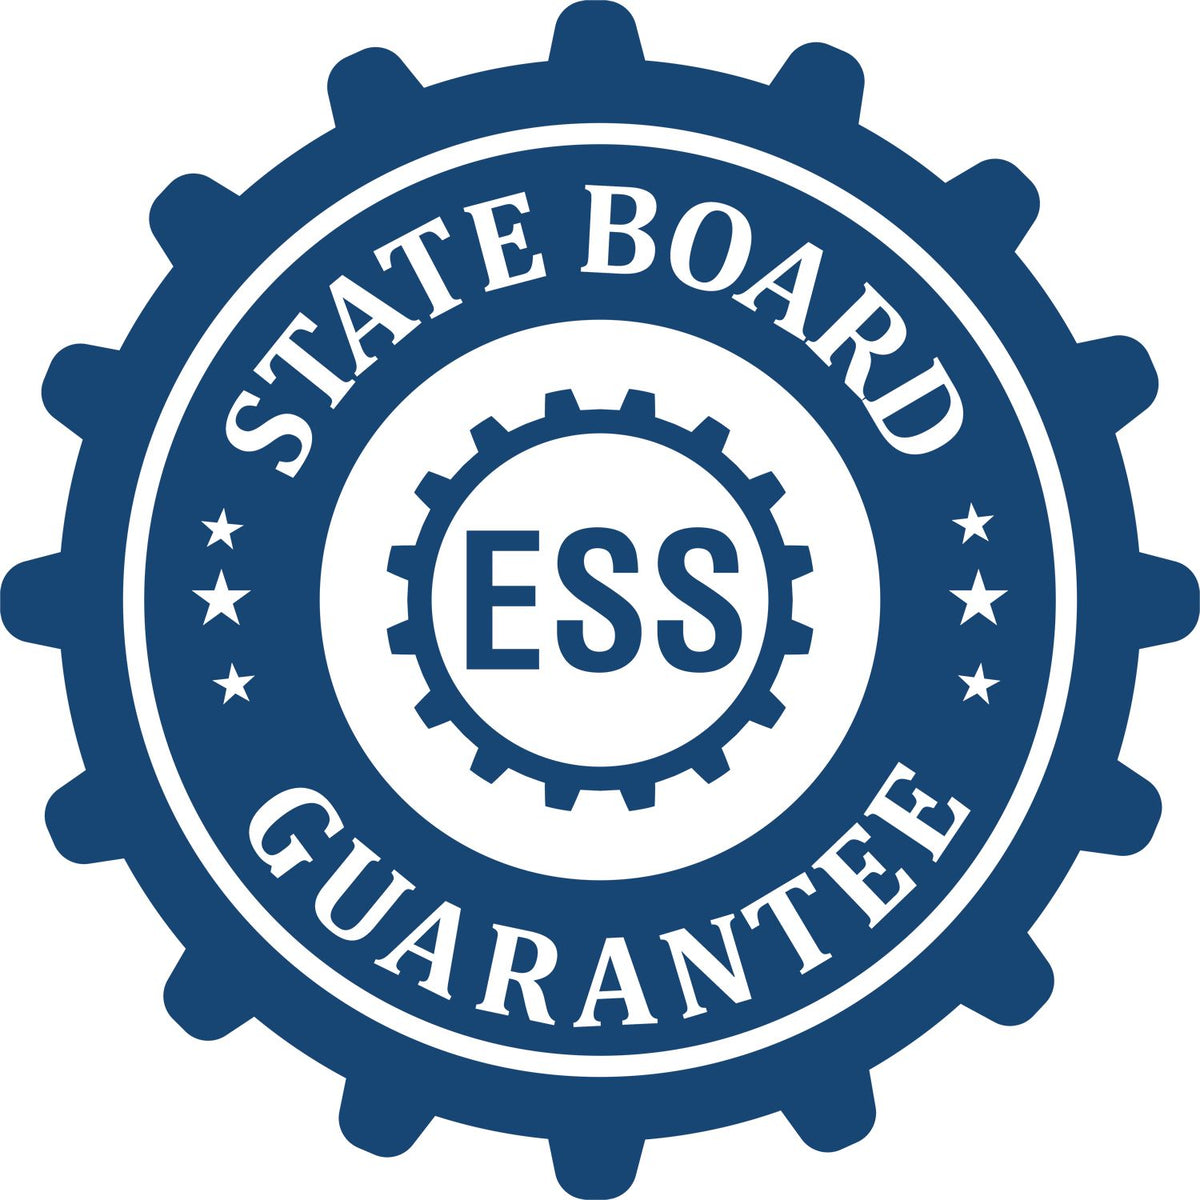 An emblem in a gear shape illustrating a state board guarantee for the New York Engineer Desk Seal product.